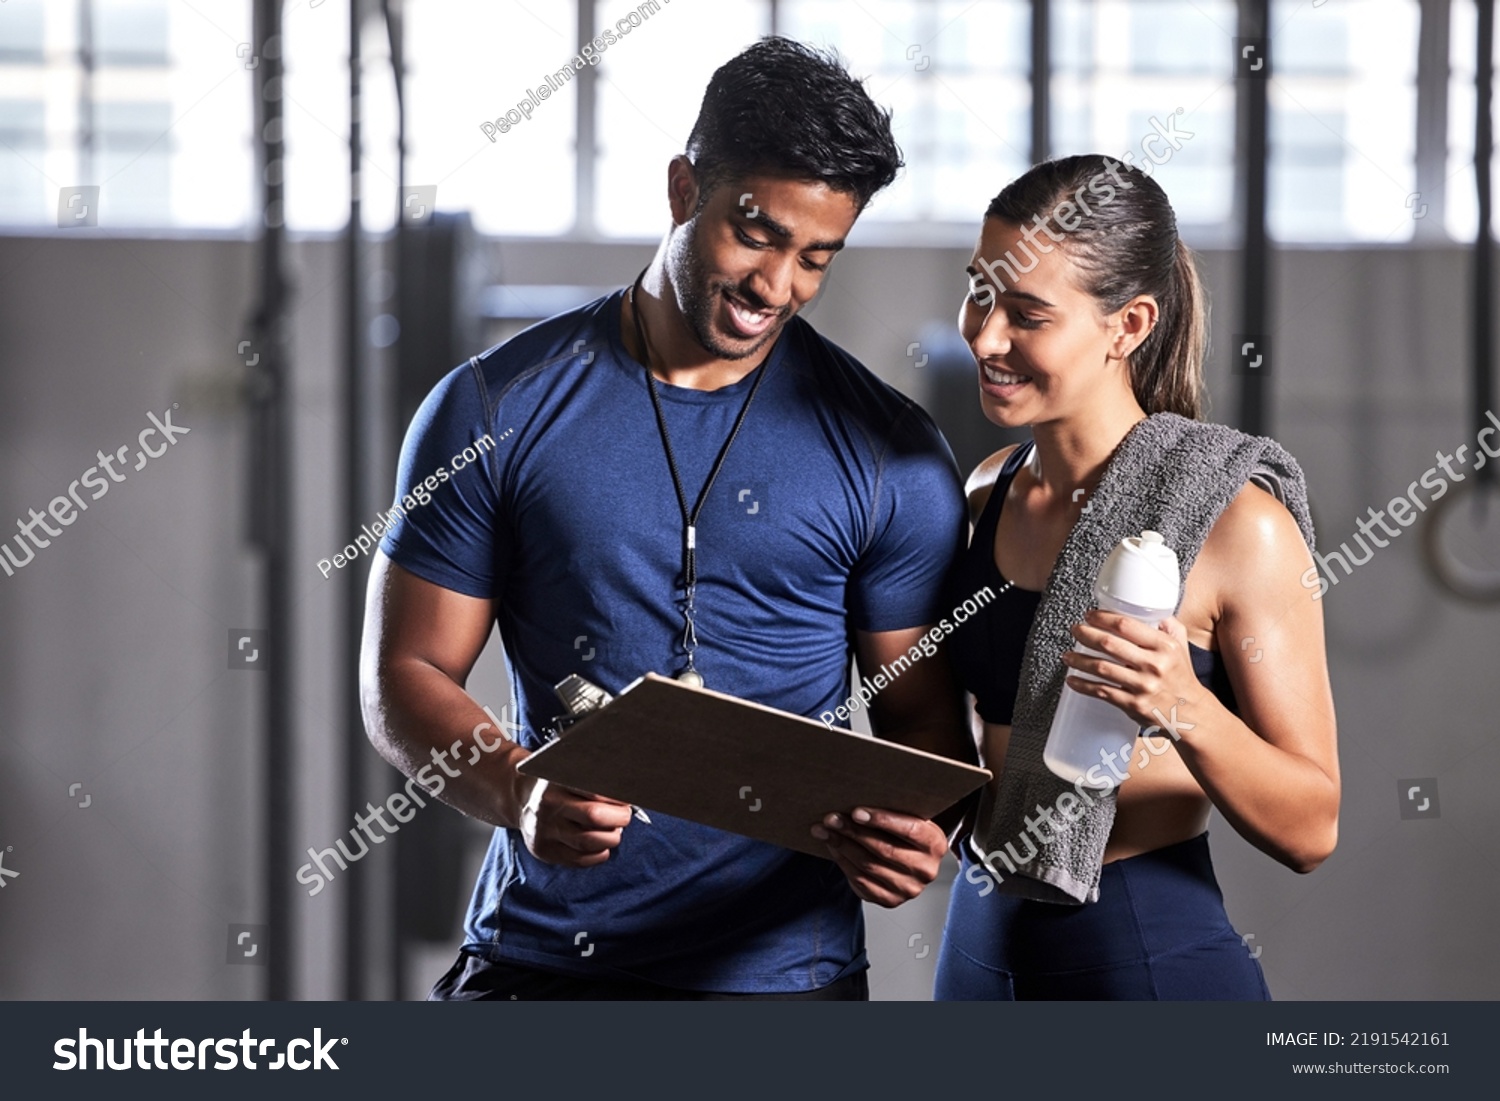 Gym subscription, personal trainer and happy client talking and ready to fill in a membership form. Fitness coach discussing training, workout plan and progress in a health and wellness facility #2191542161